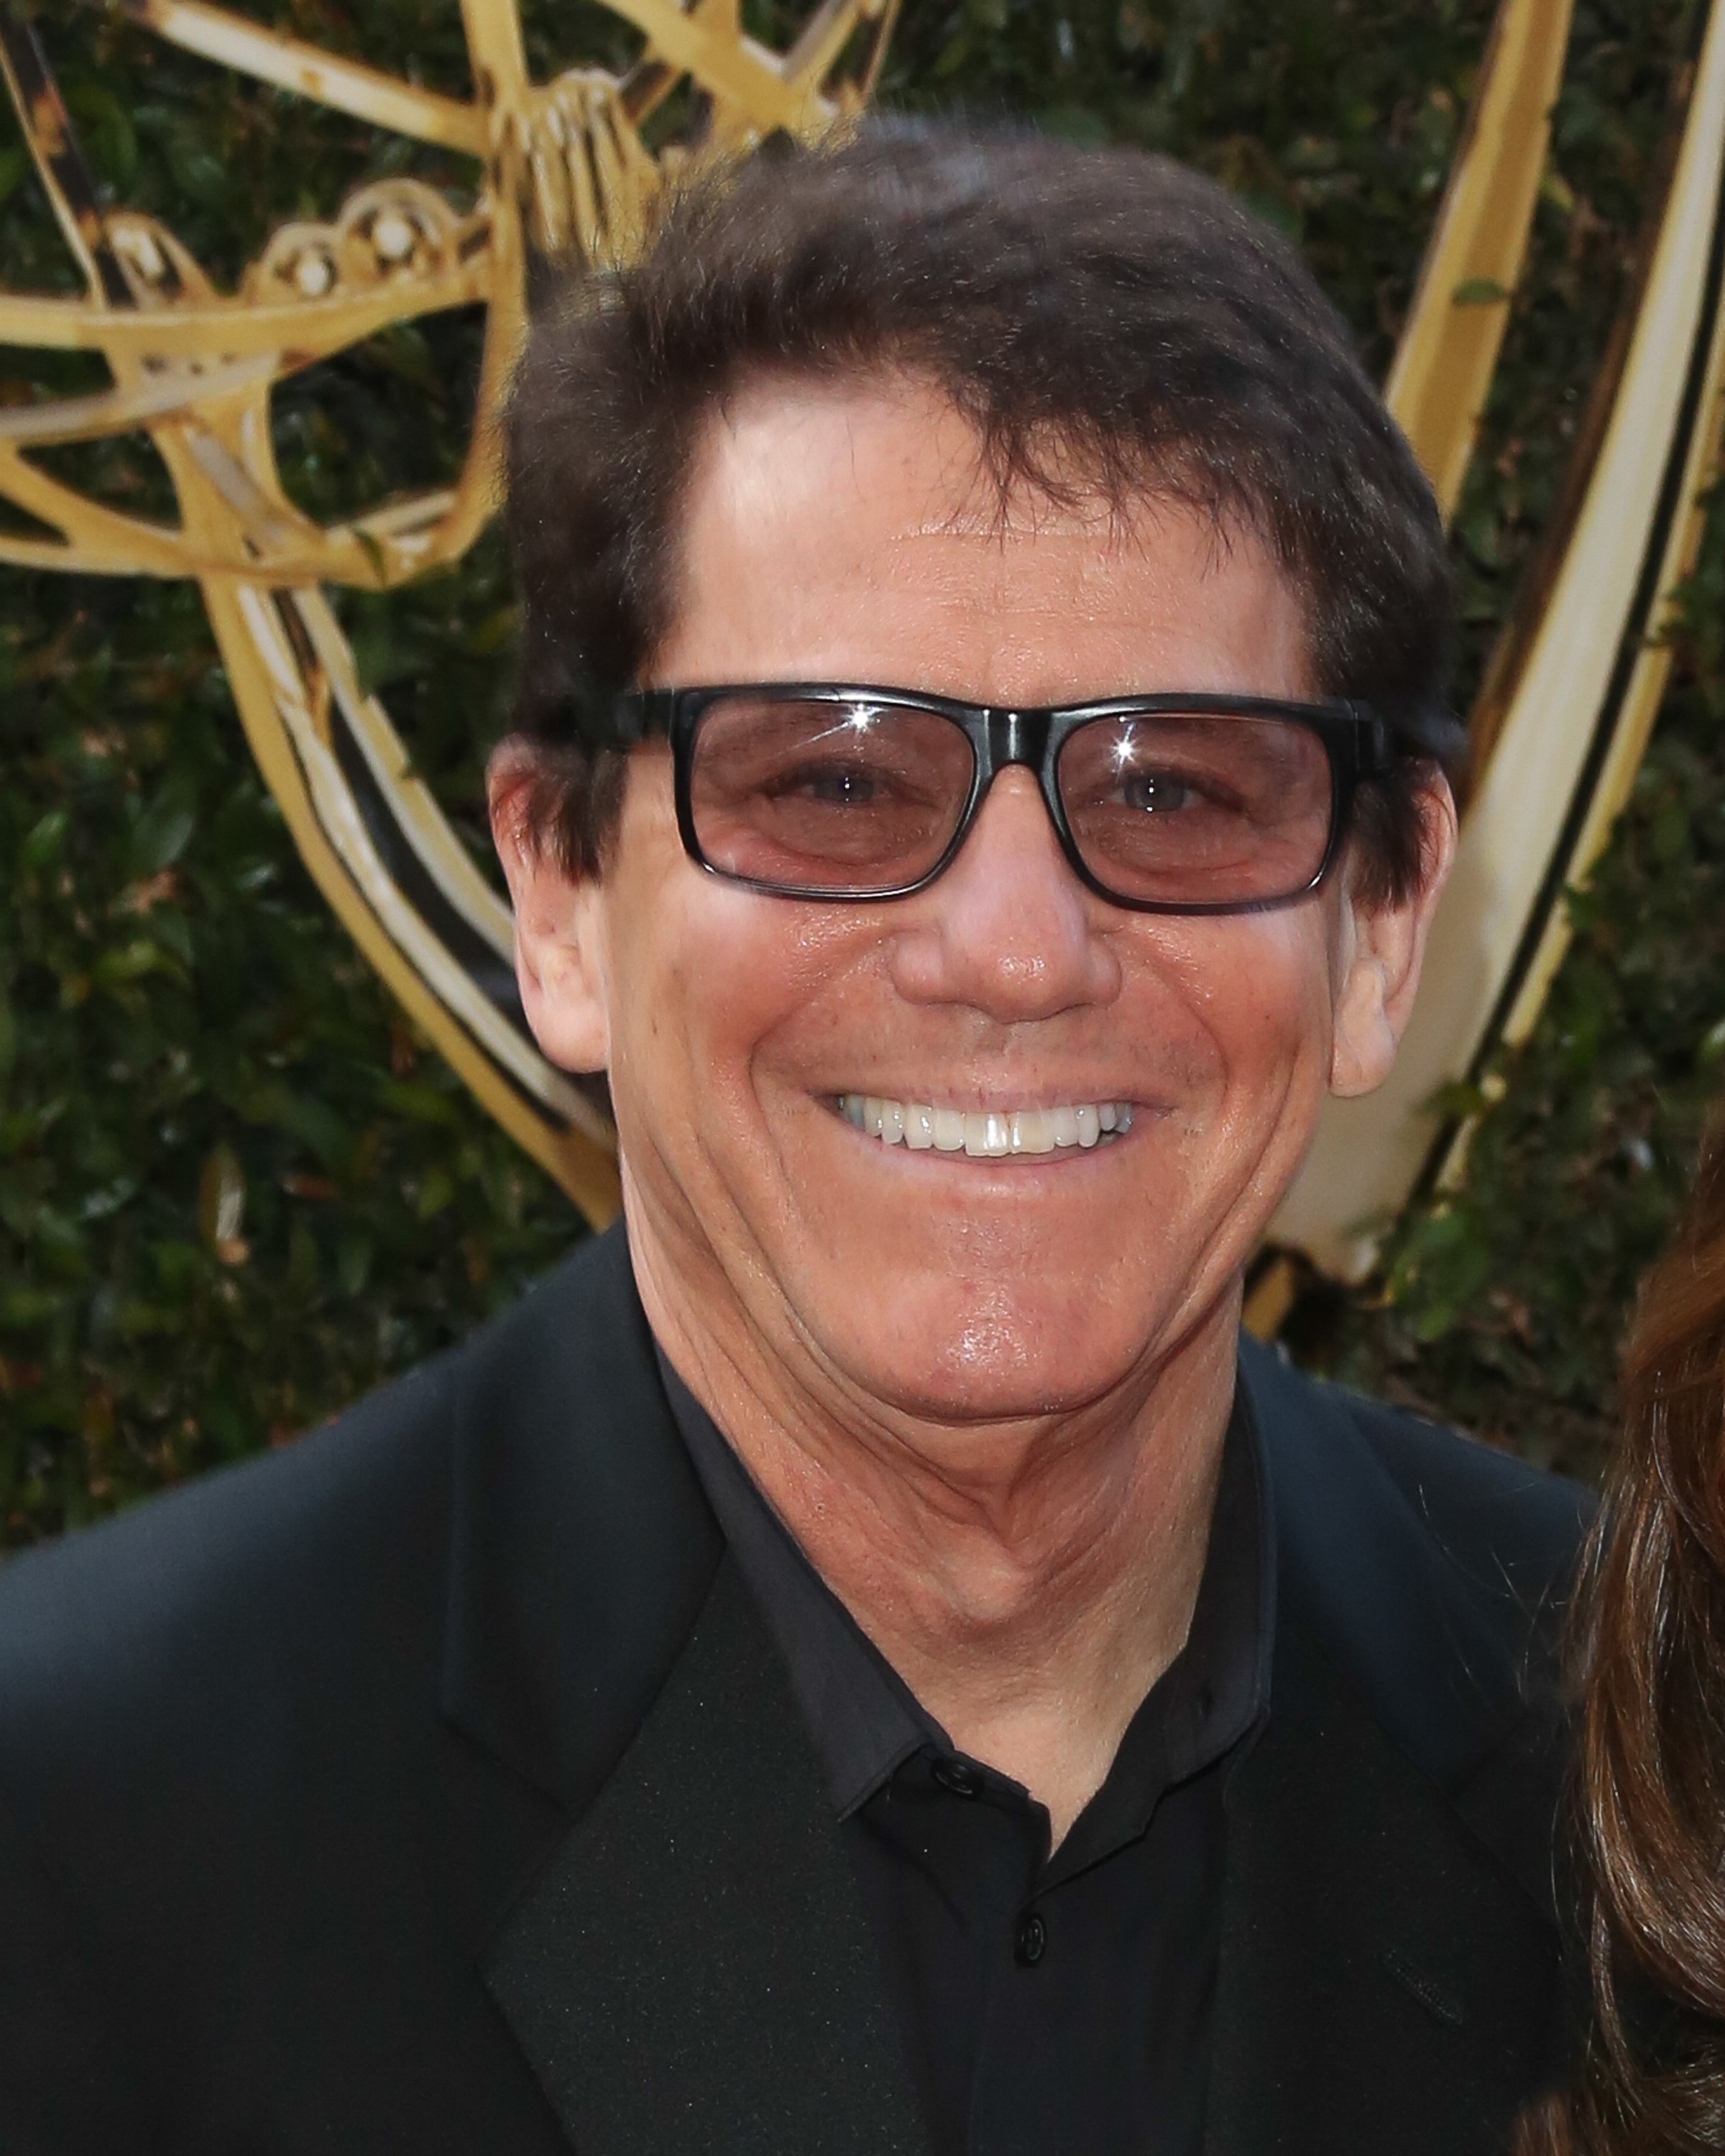 Anson Williams at the 2016 Daytime Creative Arts Emmy Awards on April 29, 2016, in Los Angeles | Source: Getty Images